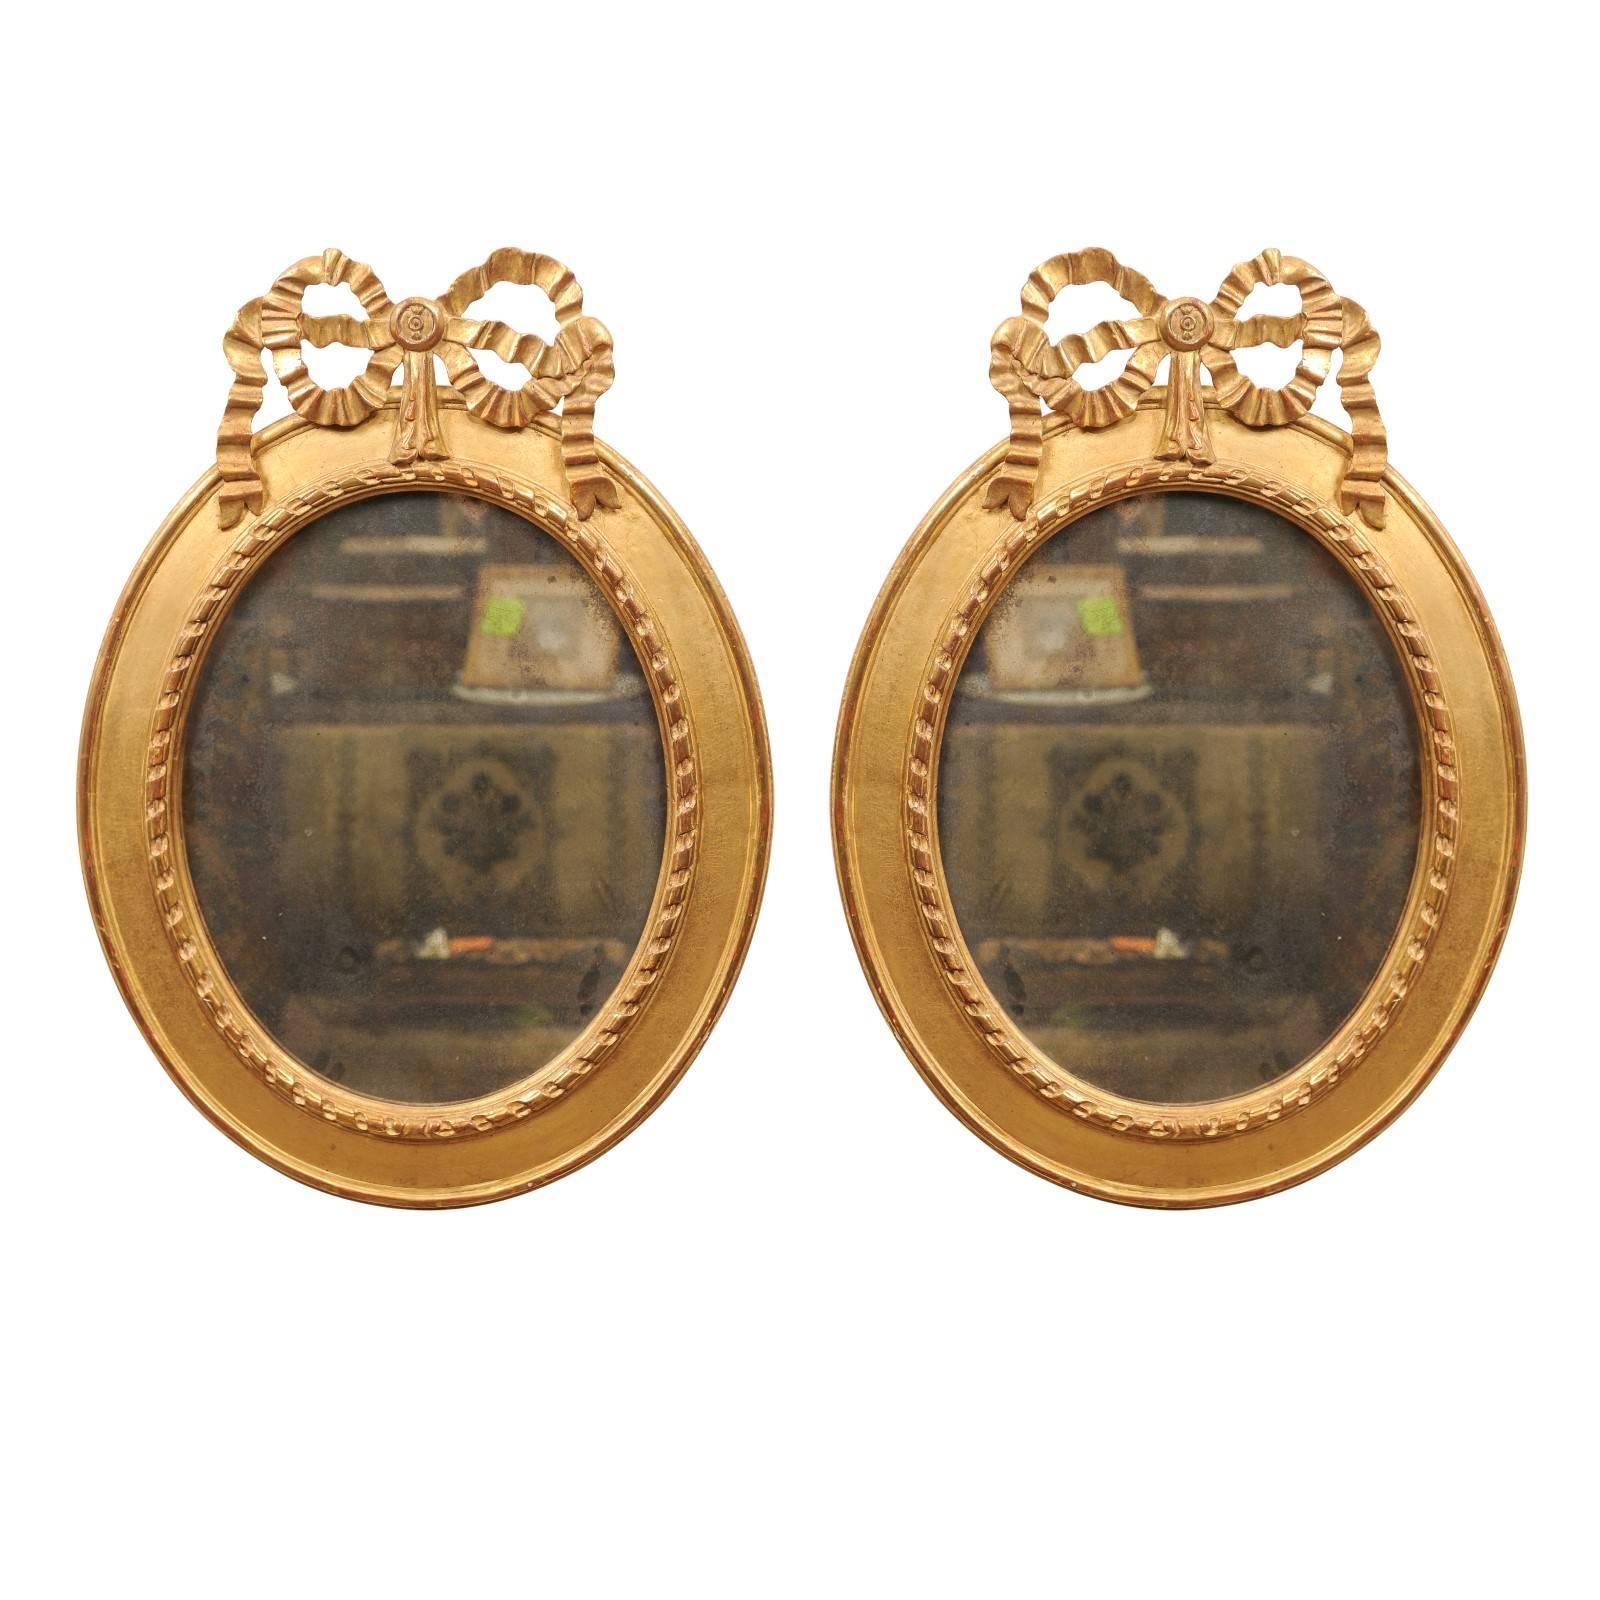 Pair of Giltwood Oval Bow-Topped Mirrors, 20th Century For Sale